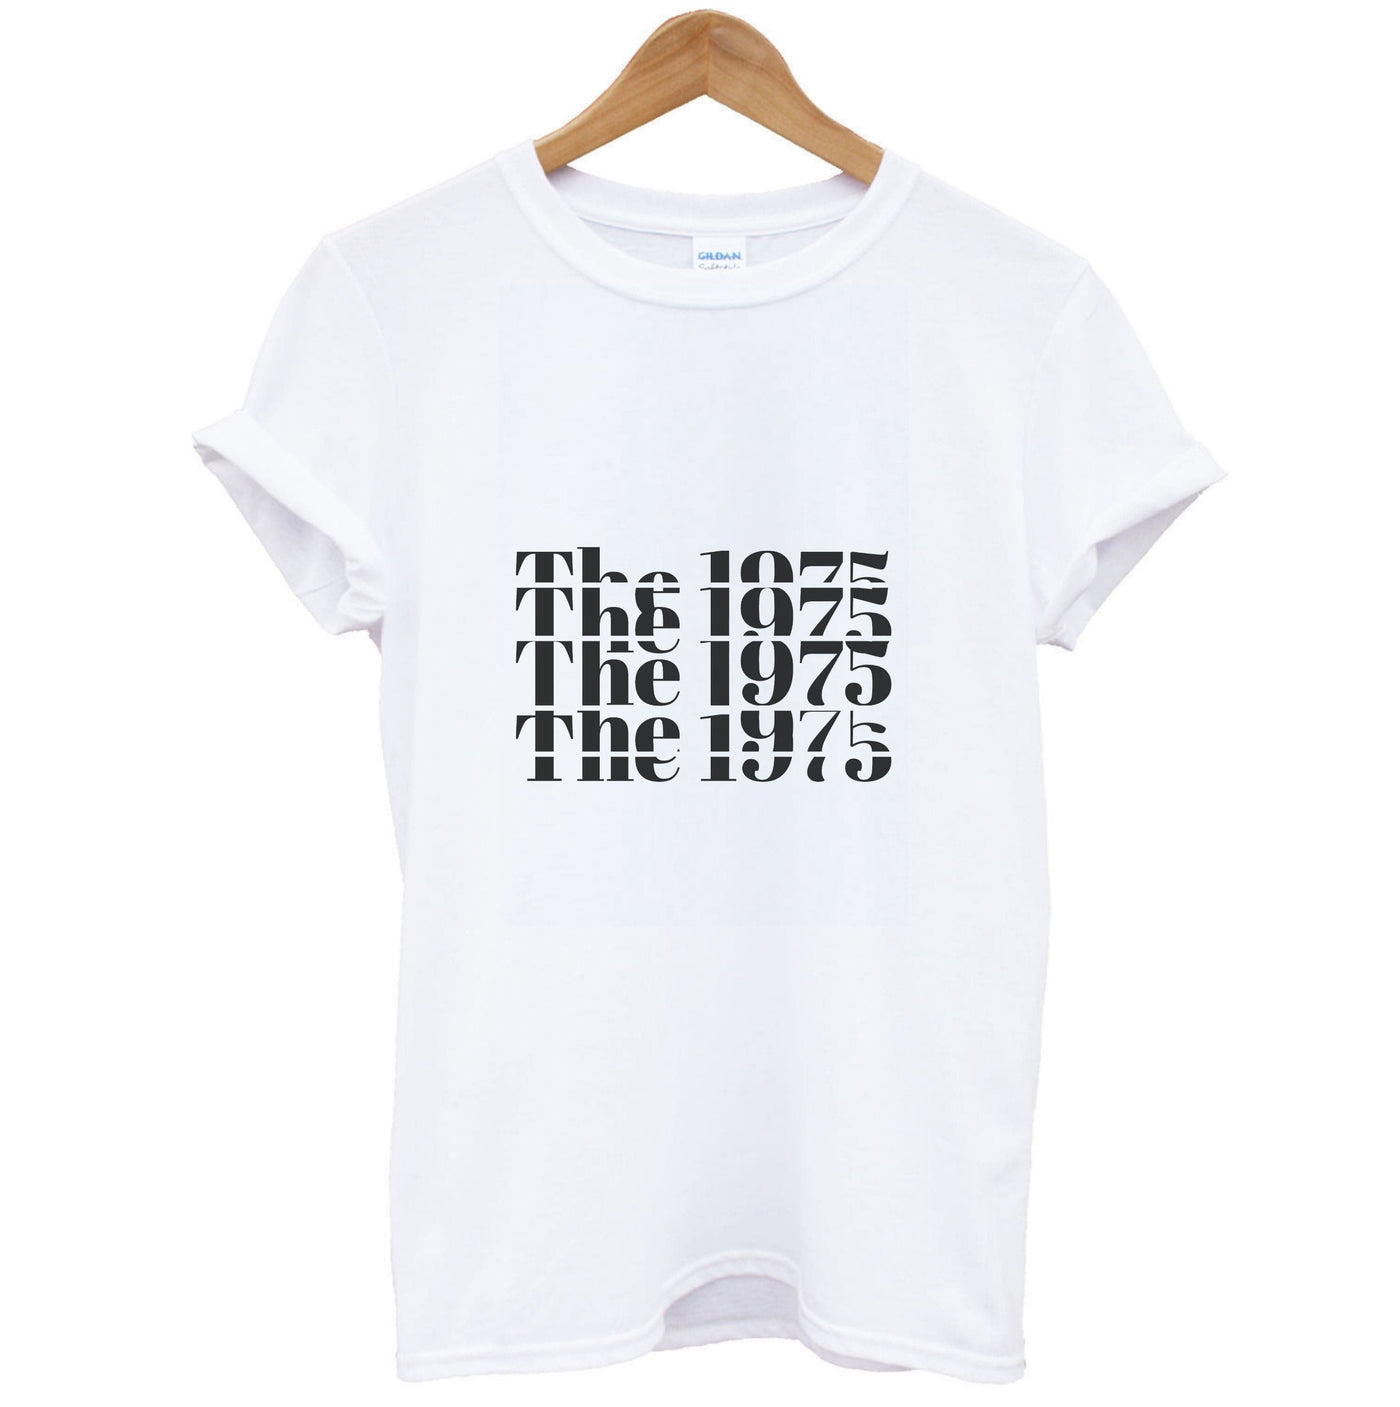 Title - The 1975 T-Shirt